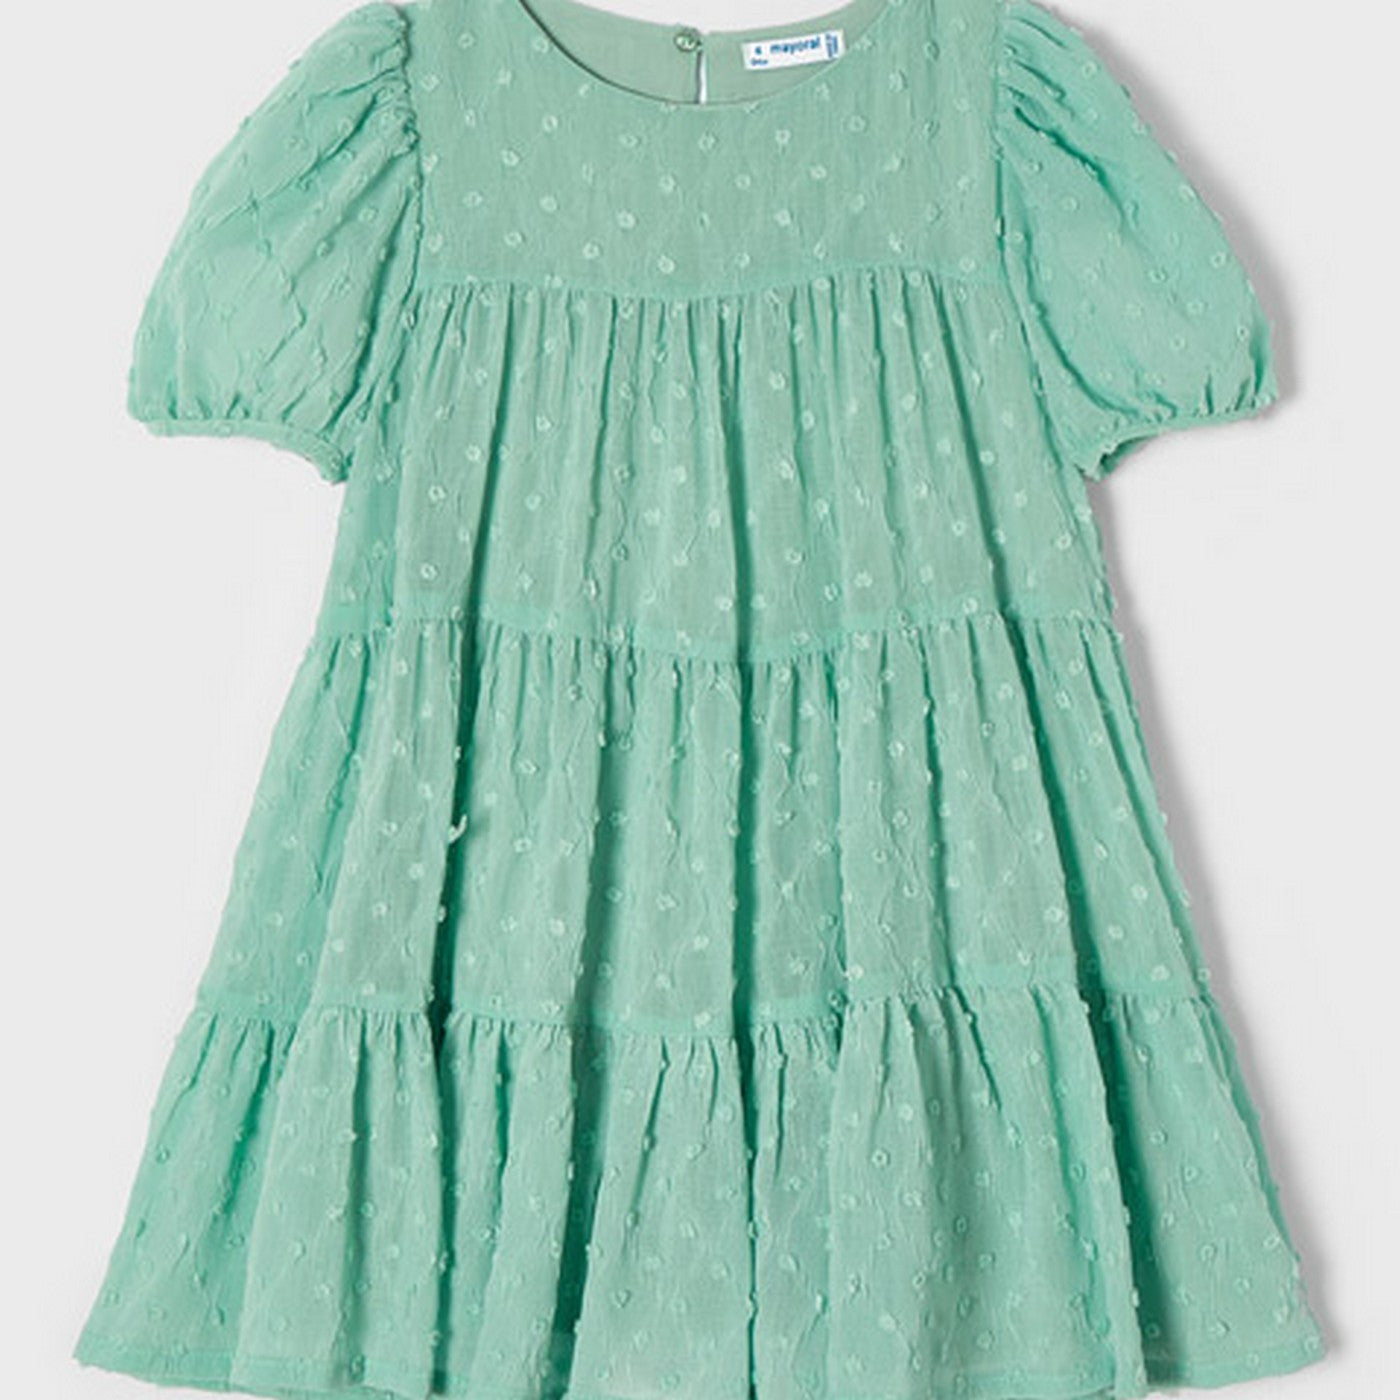 Abito Con Manica a Palloncino Verde Bambina MAYORAL 3926 - MAYORAL - LuxuryKids